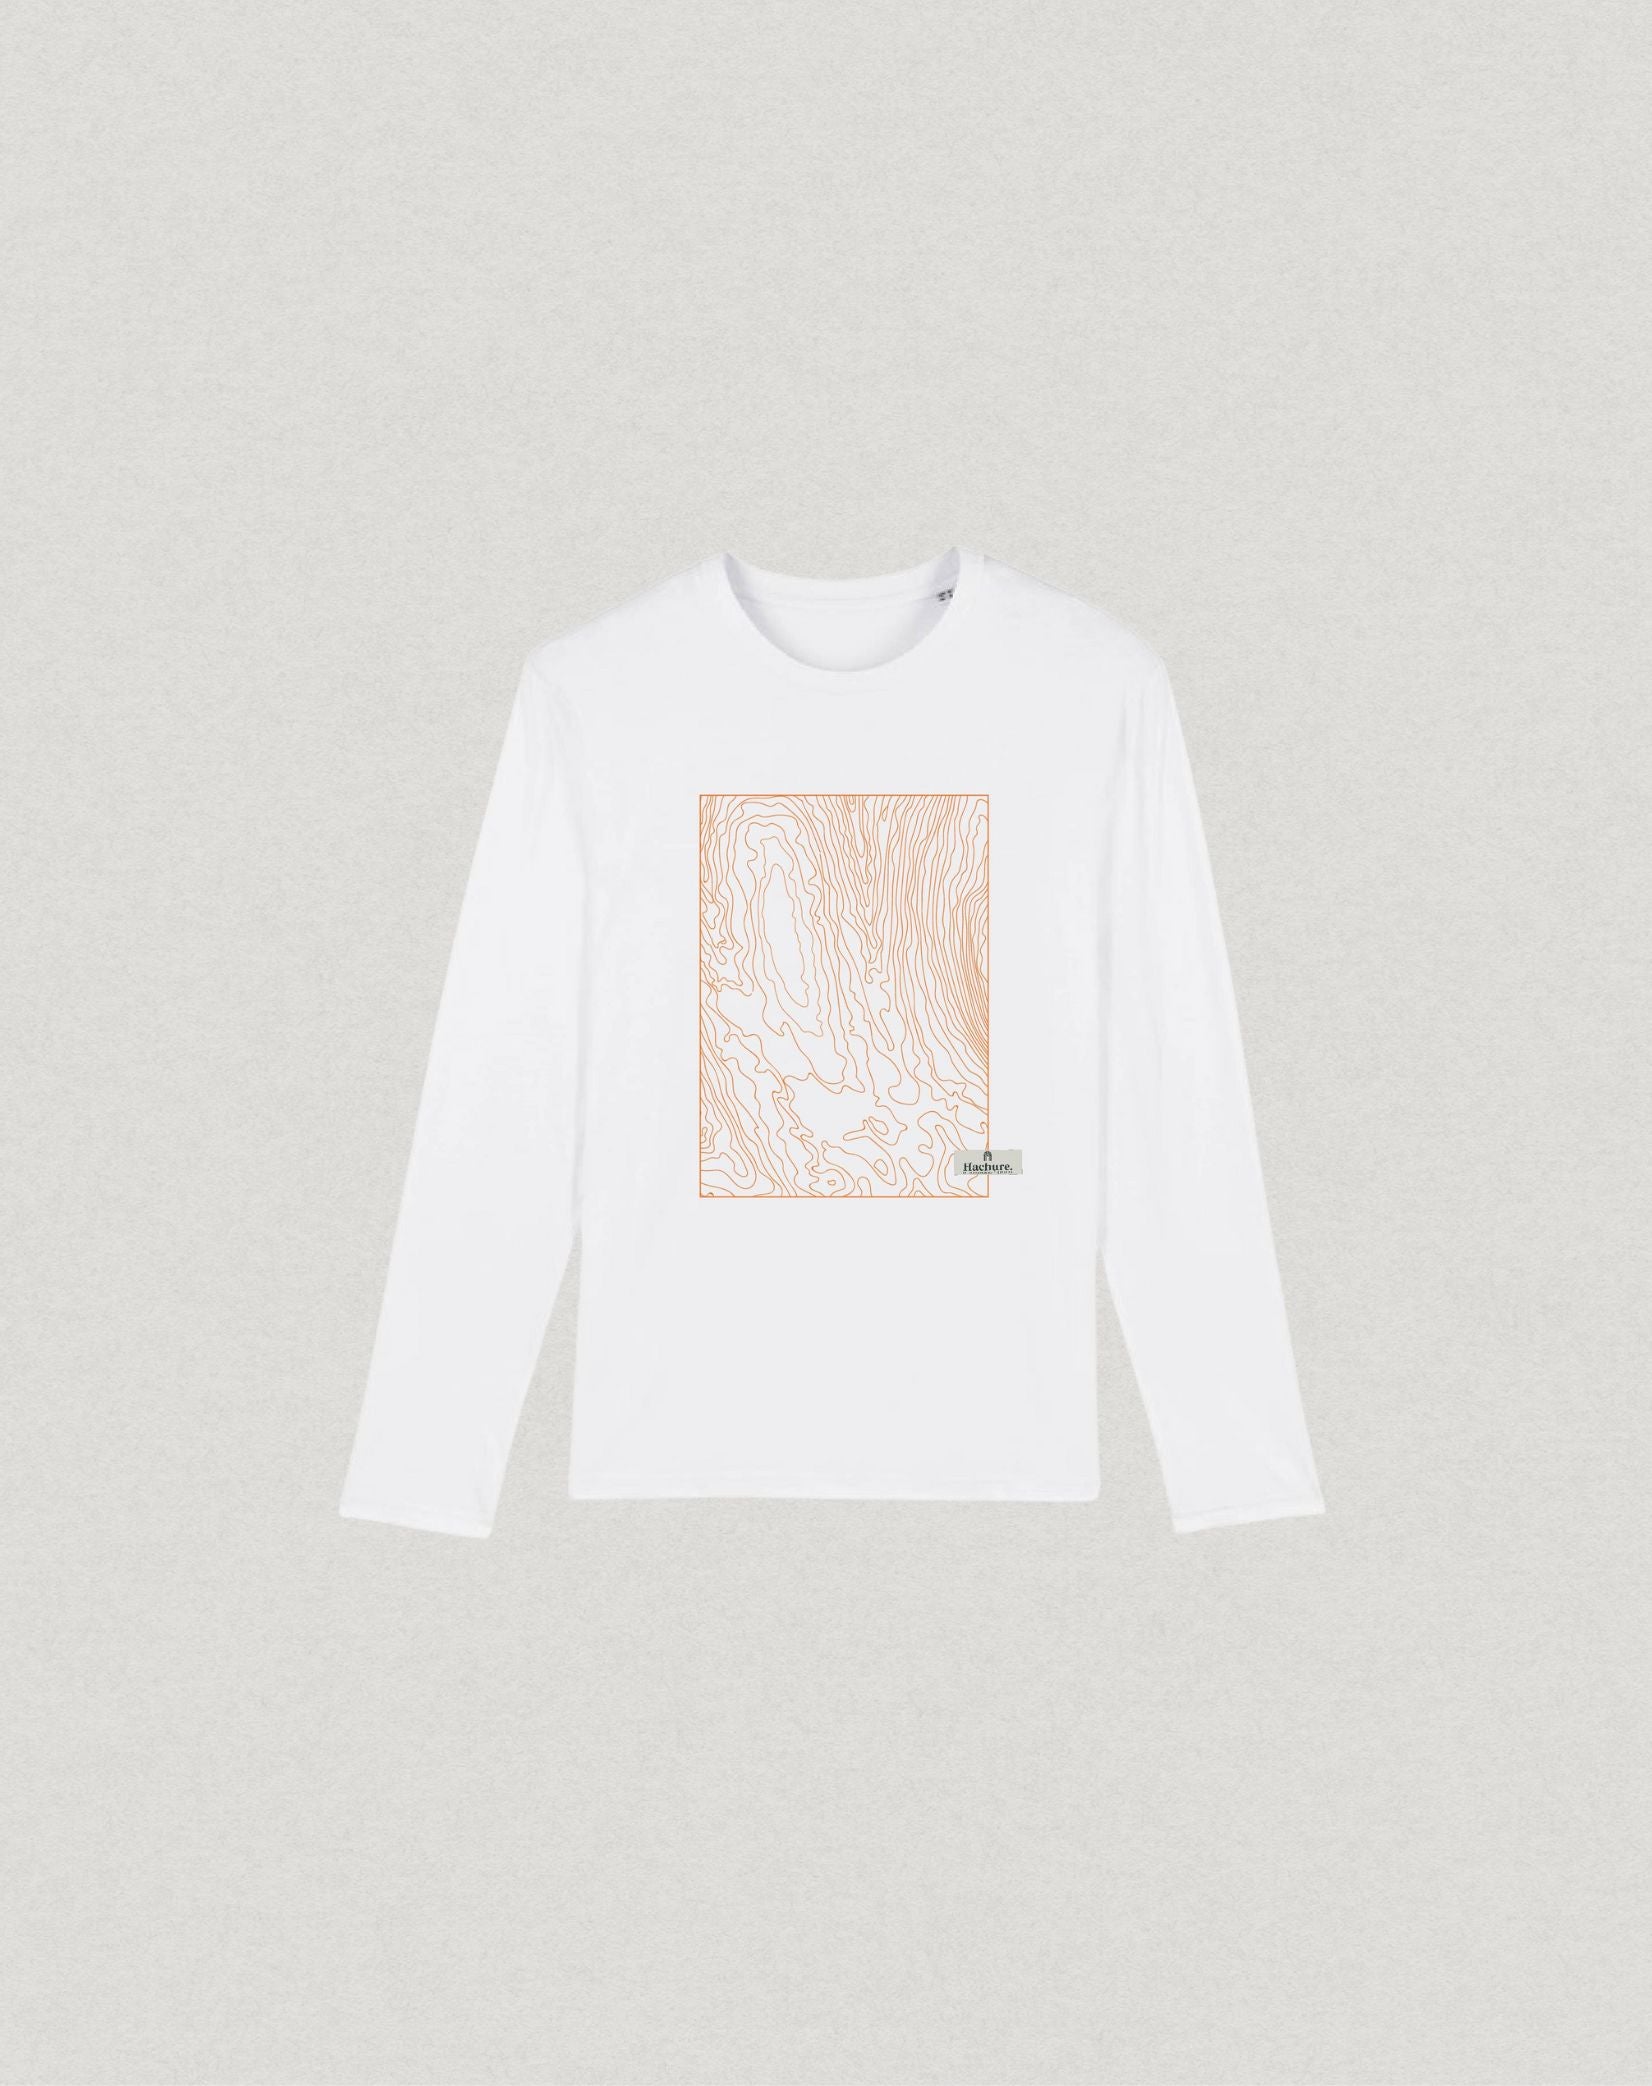 Hachure Long sleeve white t-shirt with orange hachure print on the front